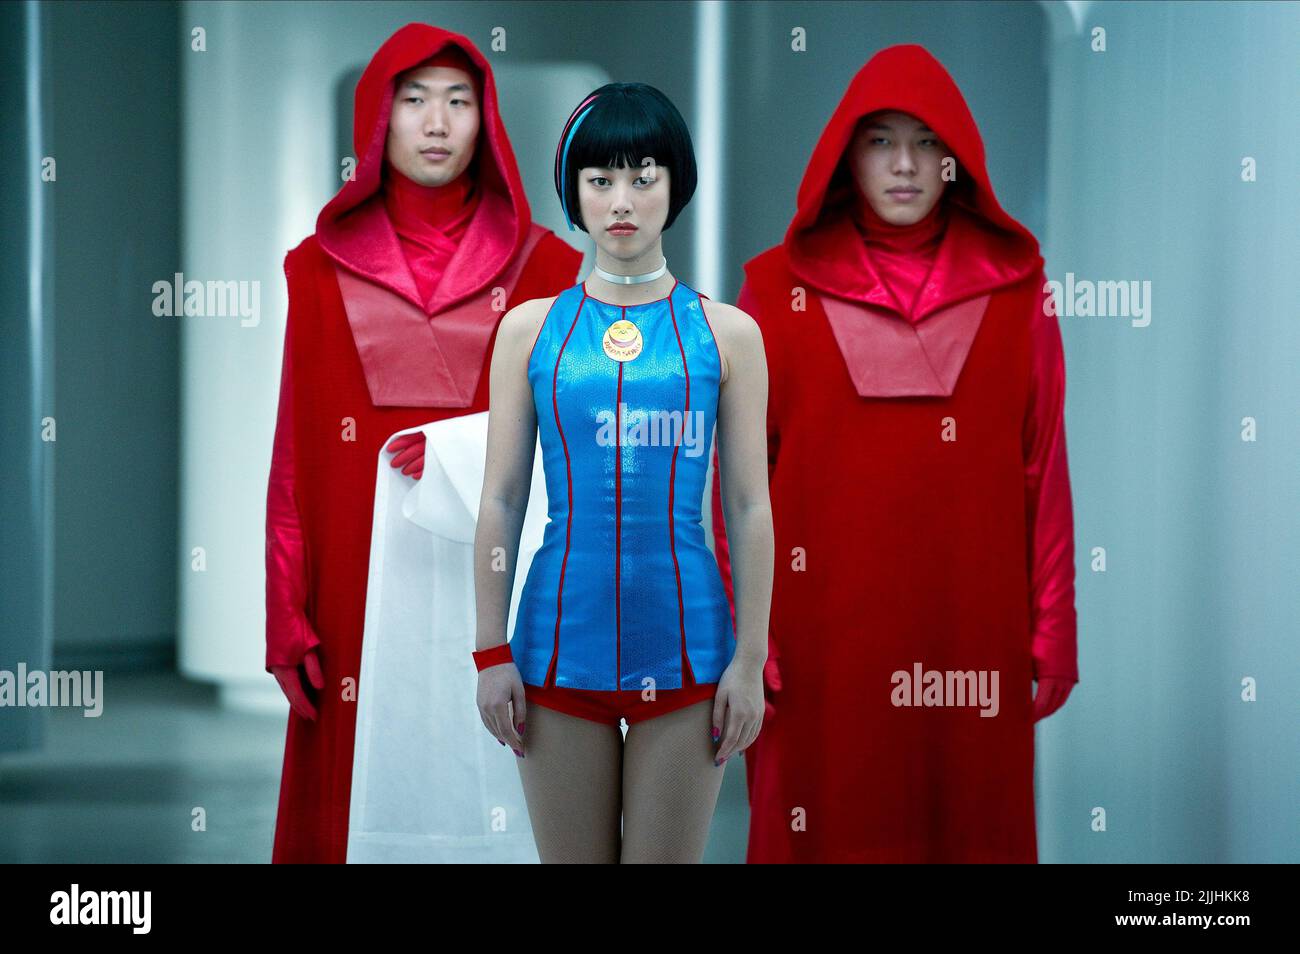 Cloud Atlas' Star Bae Doona Reteams With The Wachowskis For 'Jupiter  Ascending' – IndieWire